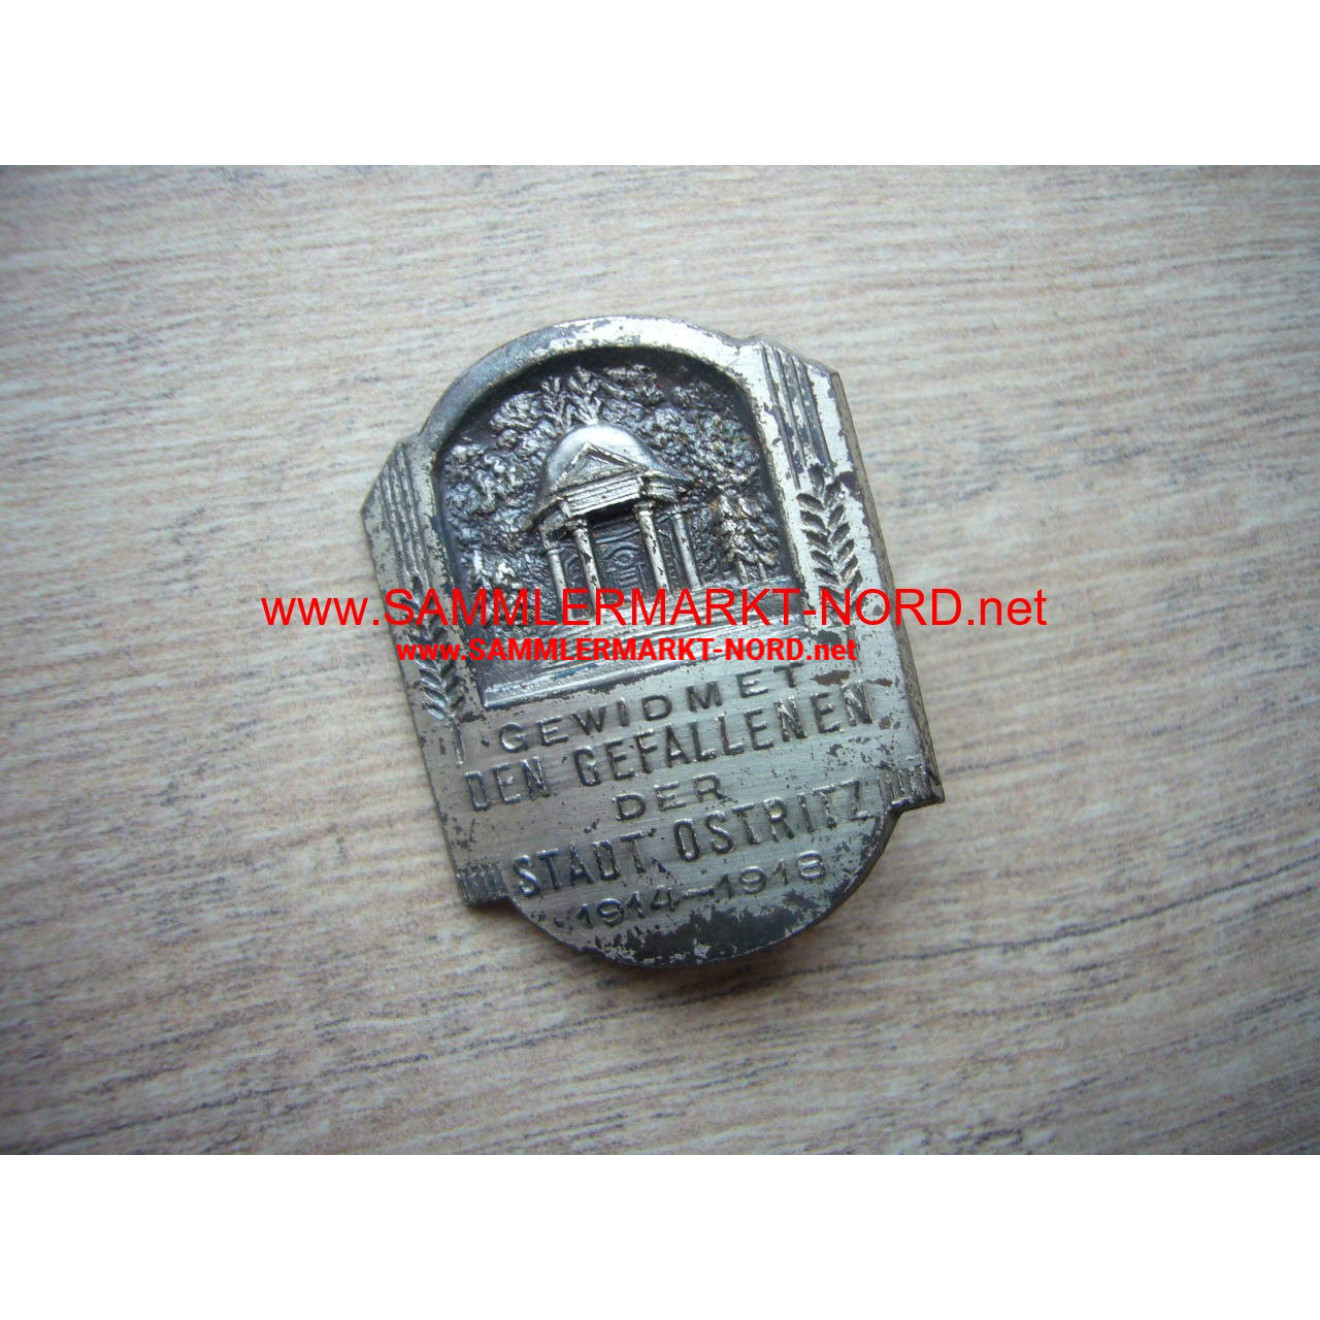 The dead soldiers of the city of Ostritz 1914-1918 - badge